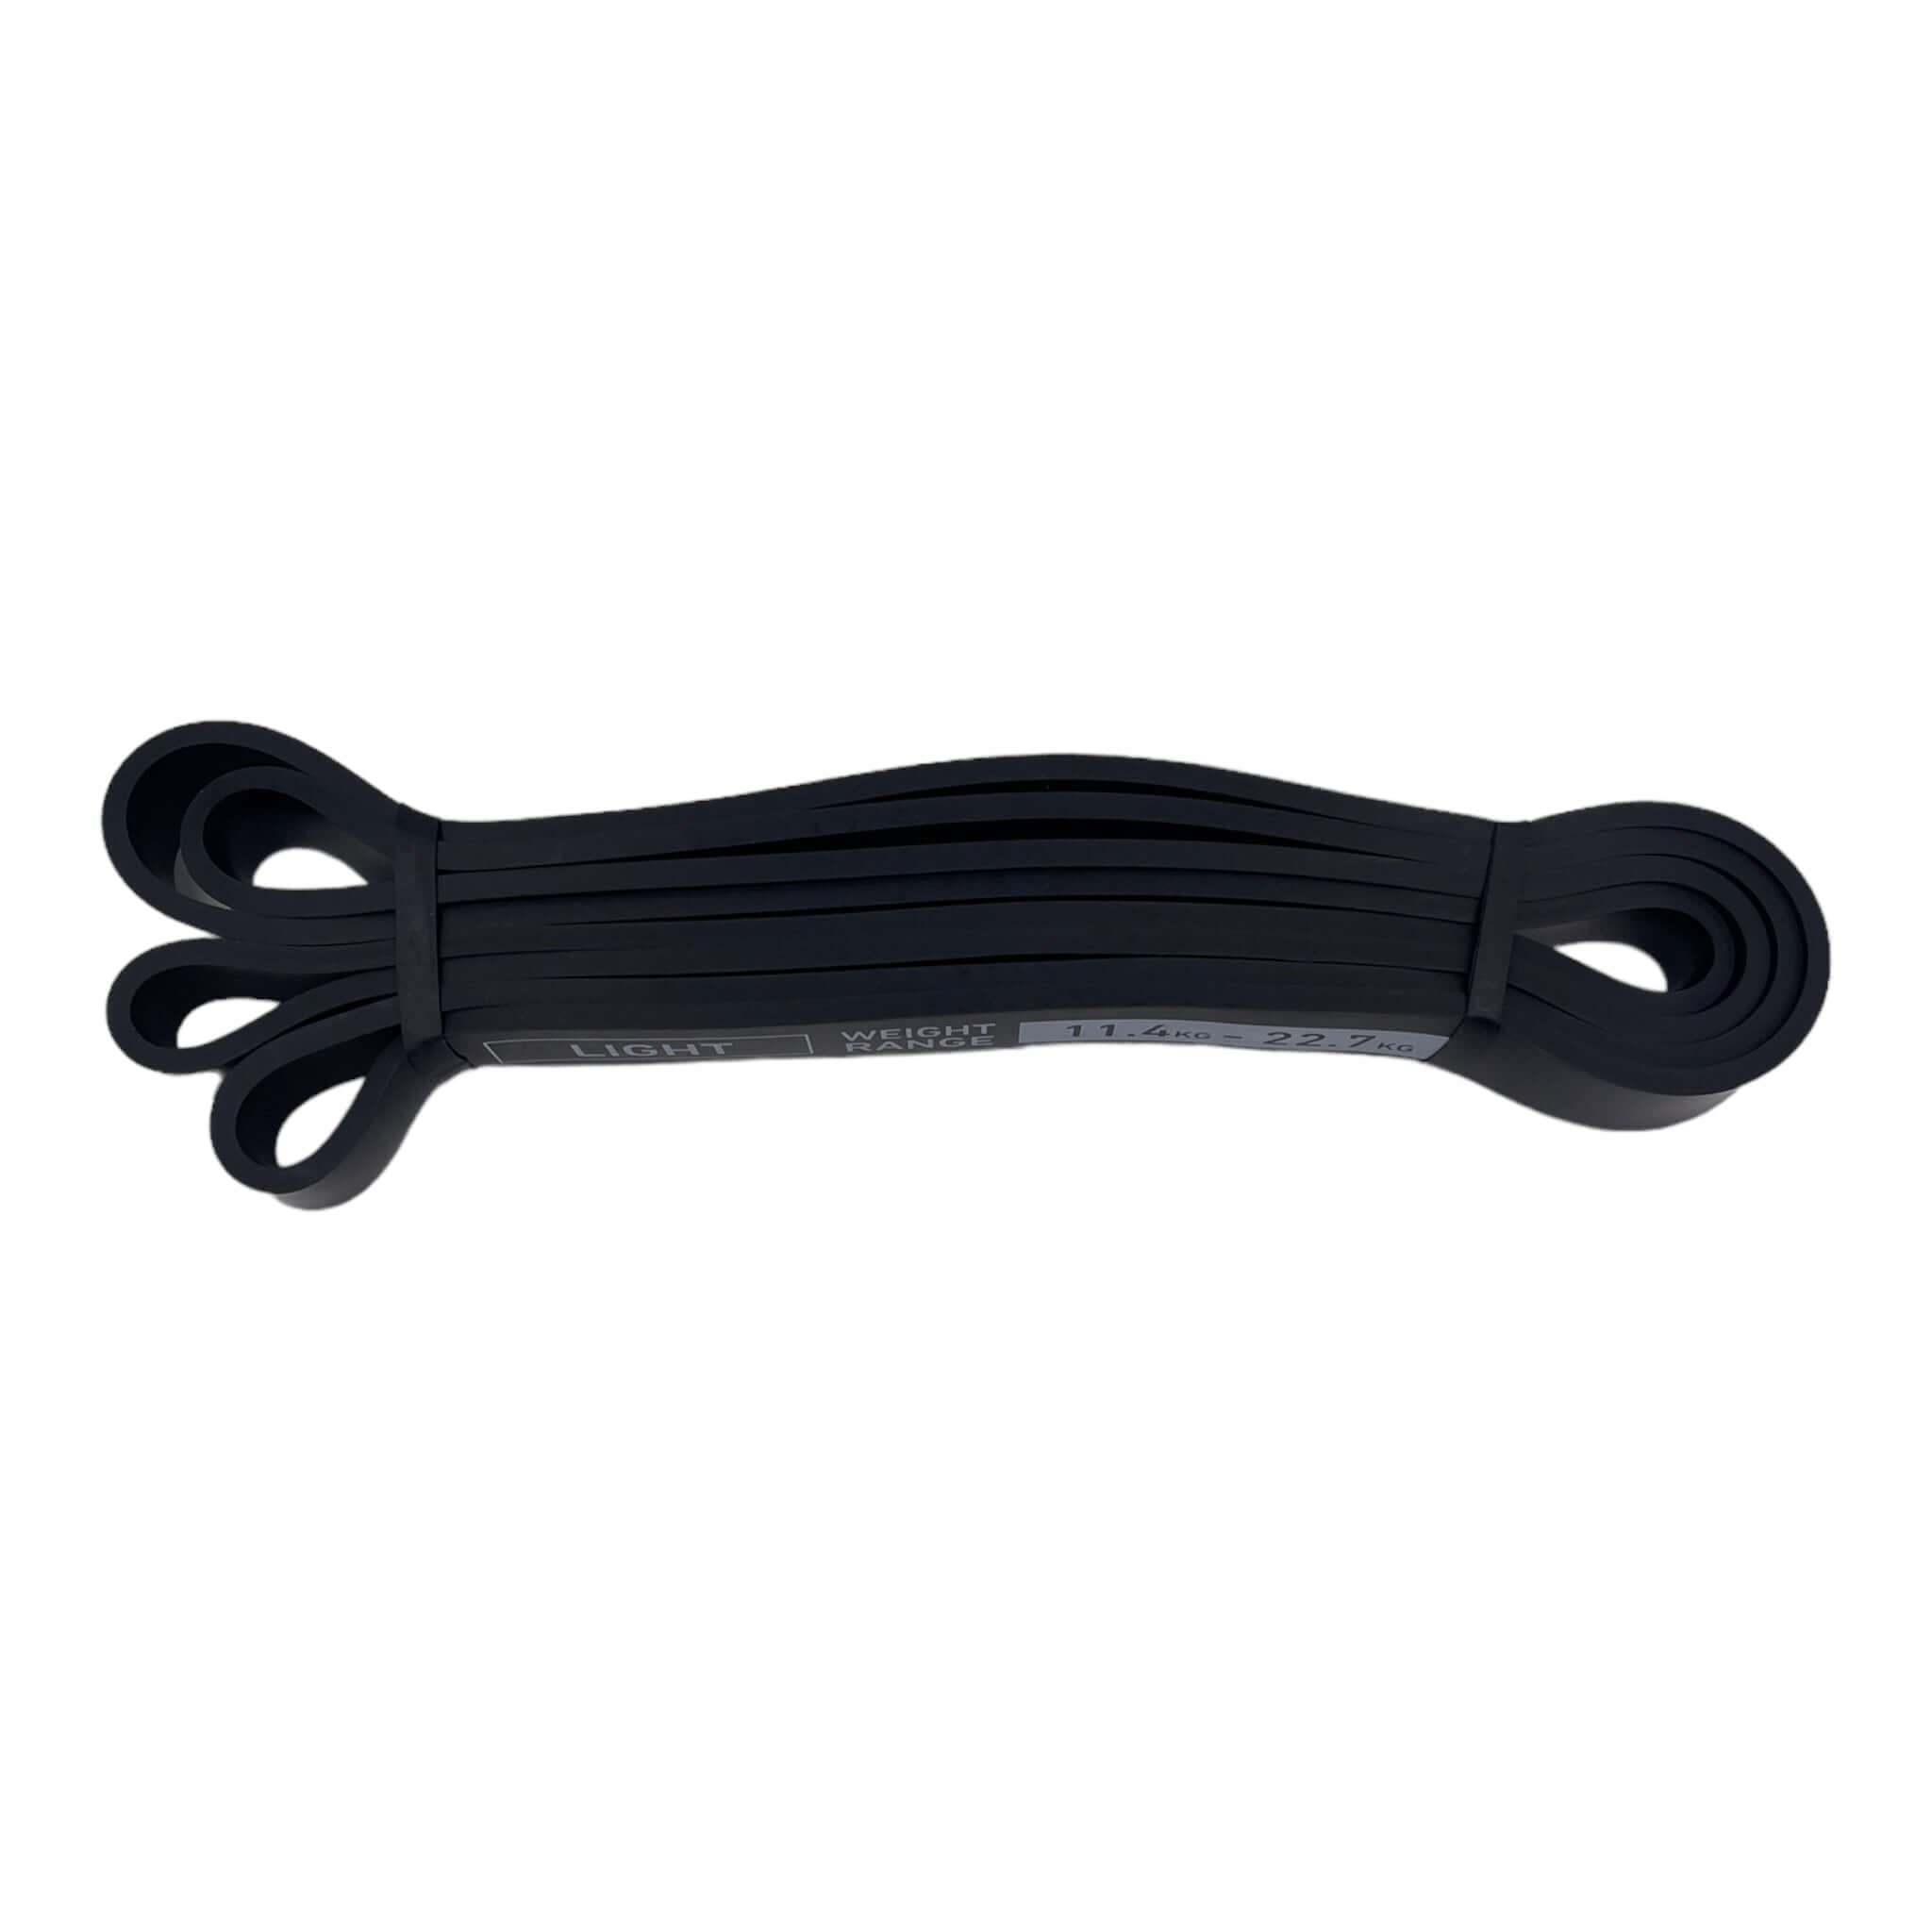 Latex Resistance Power Bands LIGHT BLACK 21mm | INSOURCE